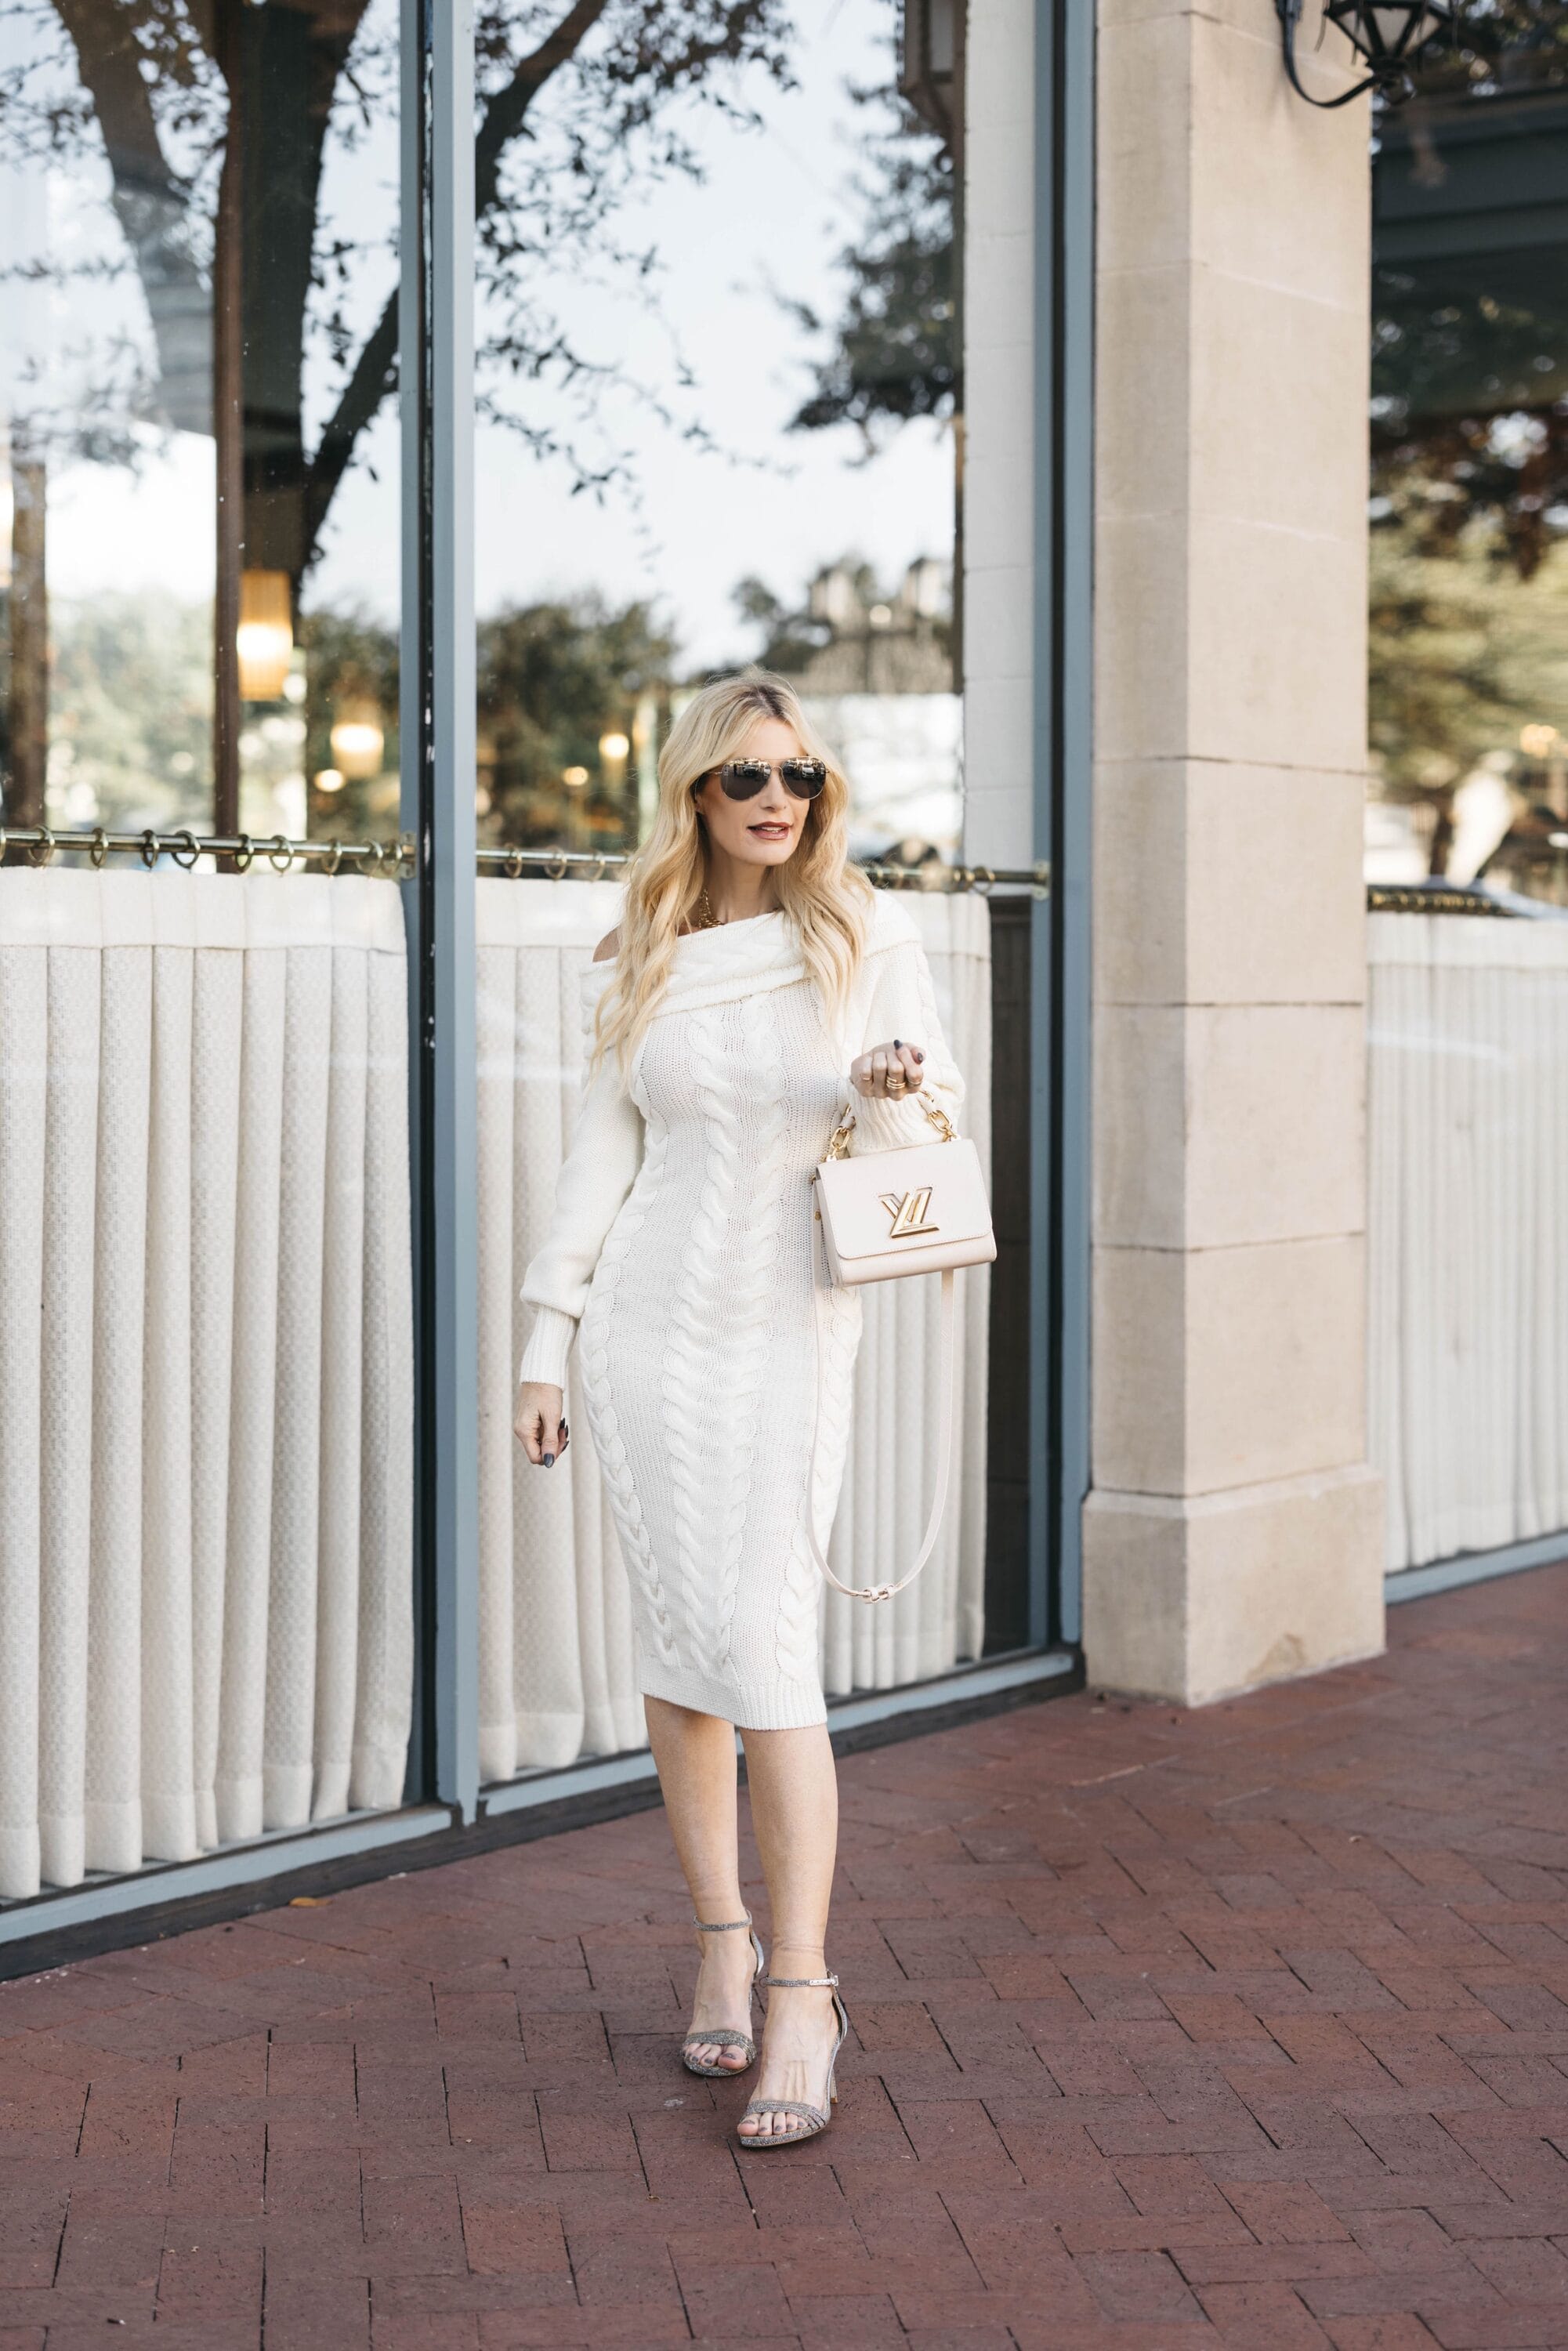 Over 40 fashion influencer wearing white sweater dress with sarah flint heels as on of 5 examples of how to wear winter white.